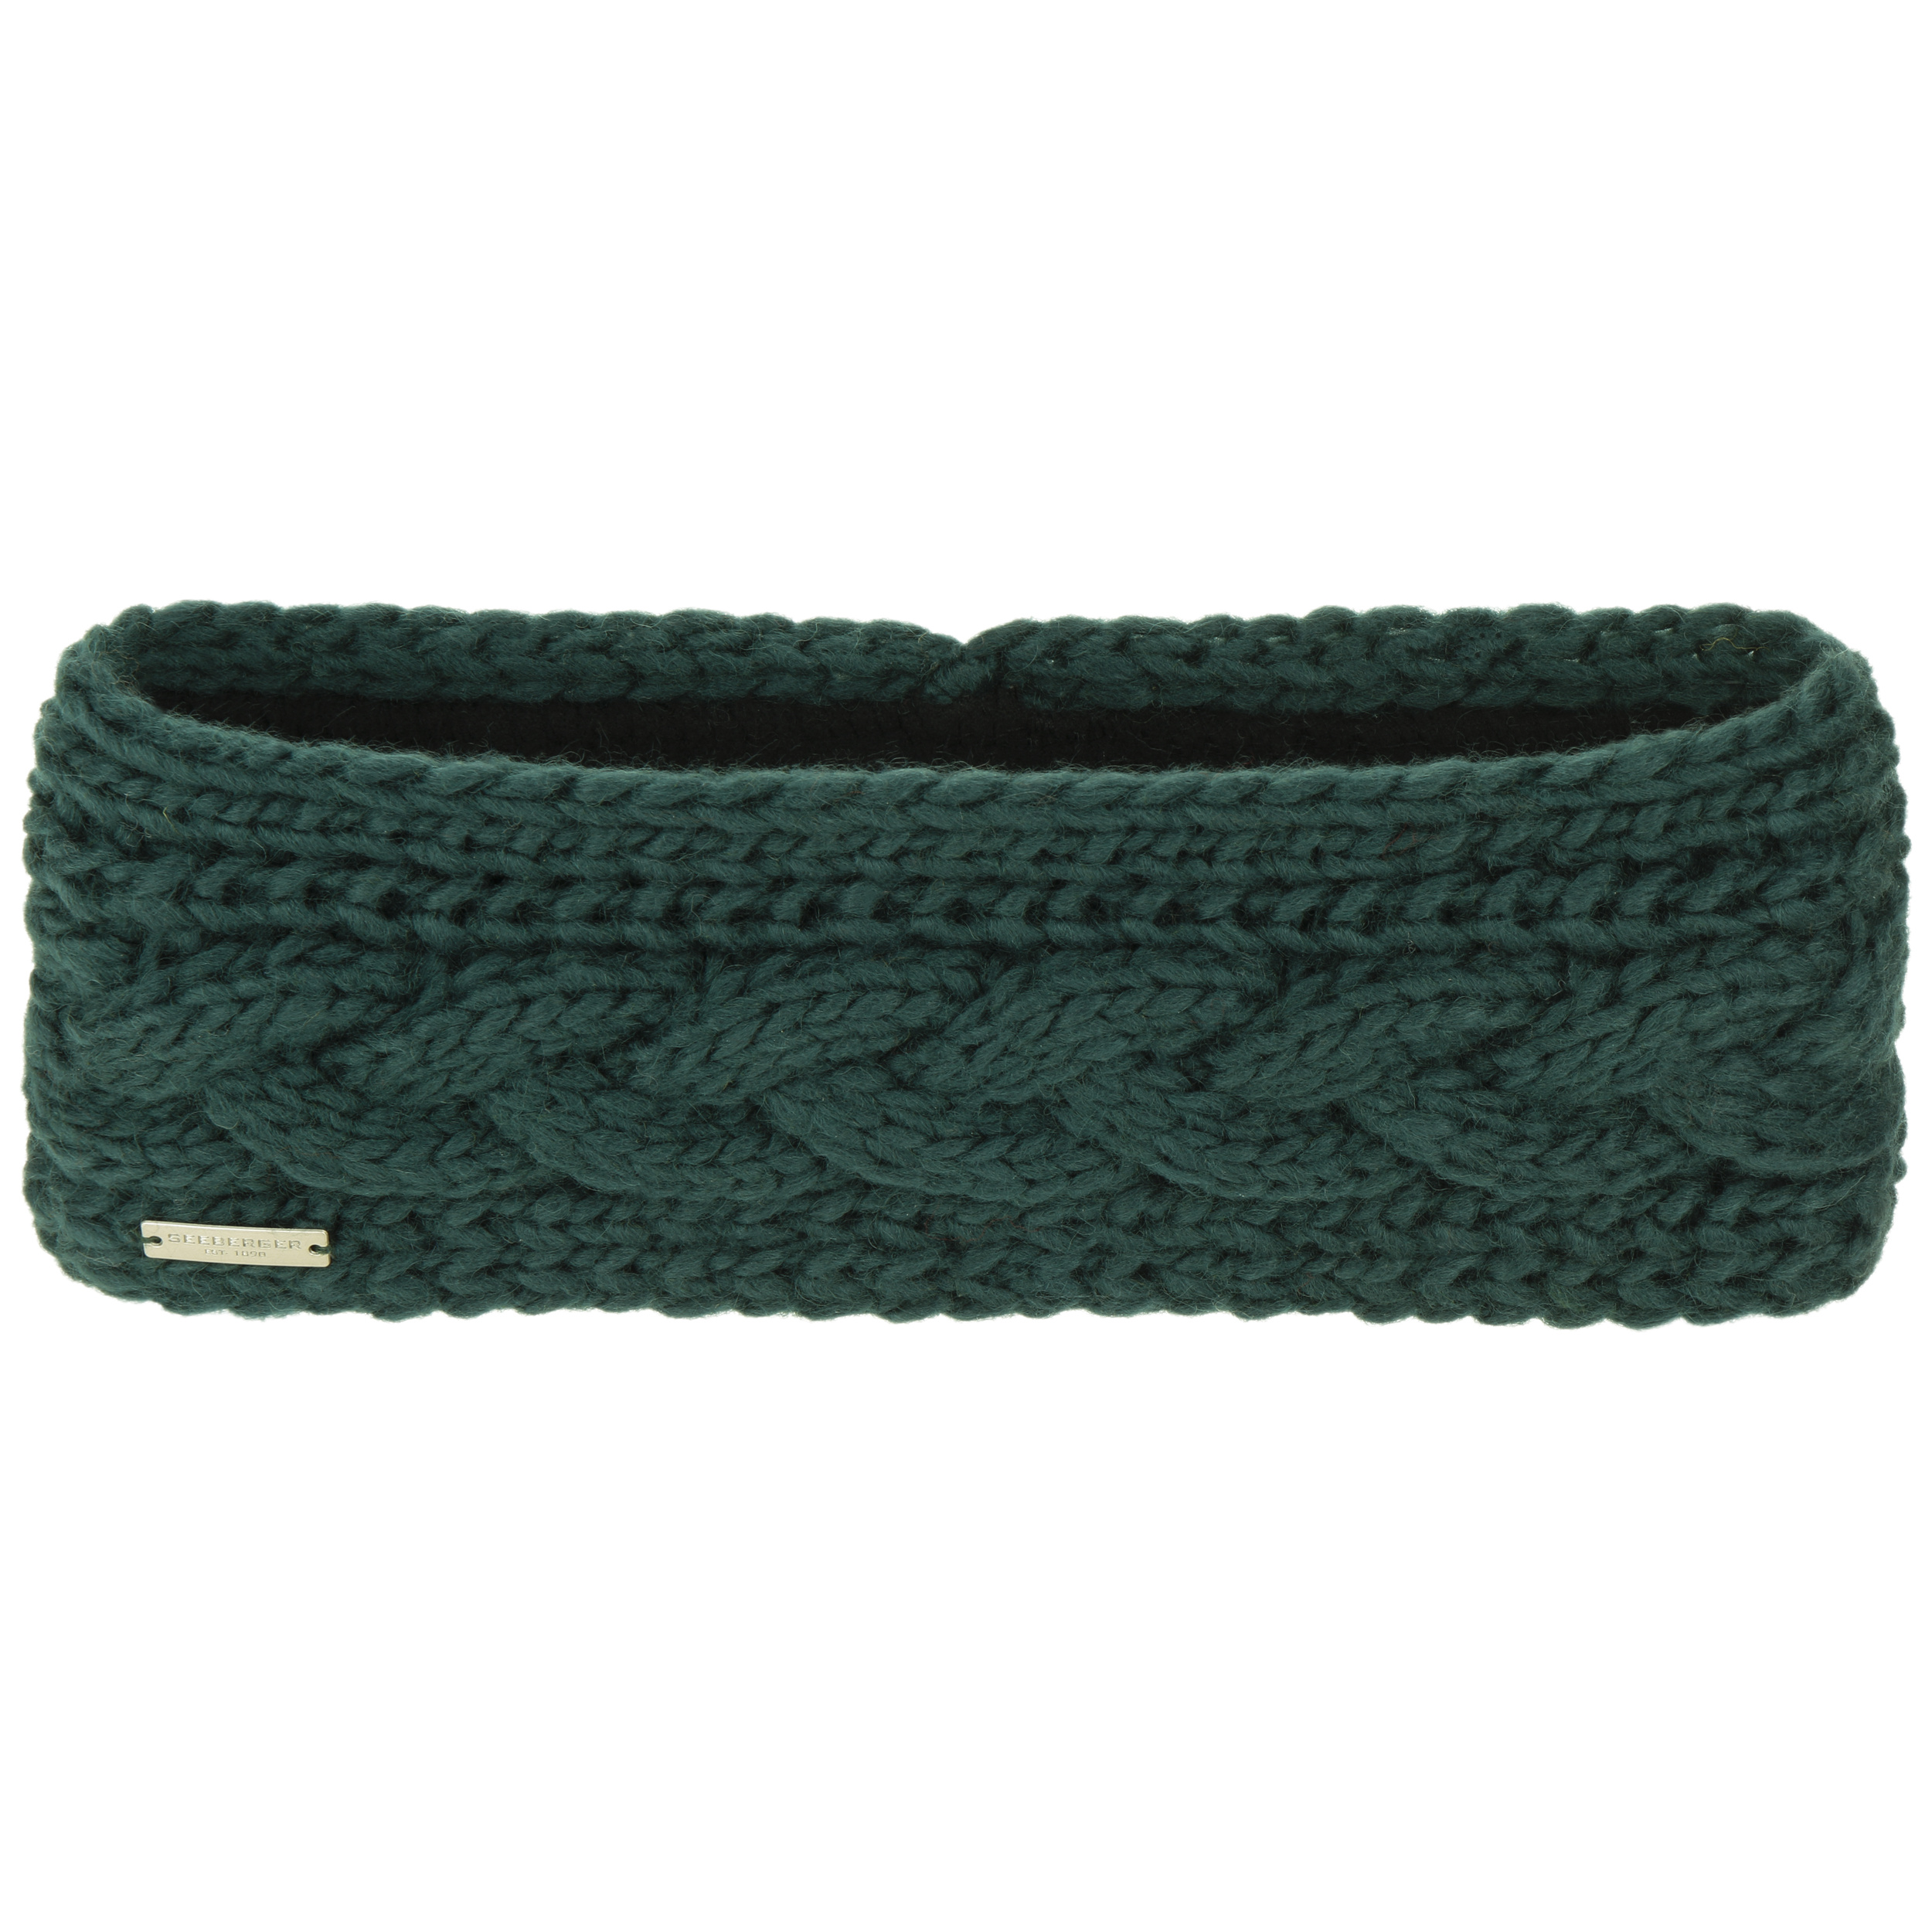 Classic Cable Knit Stirnband Seeberger € - 19,95 by